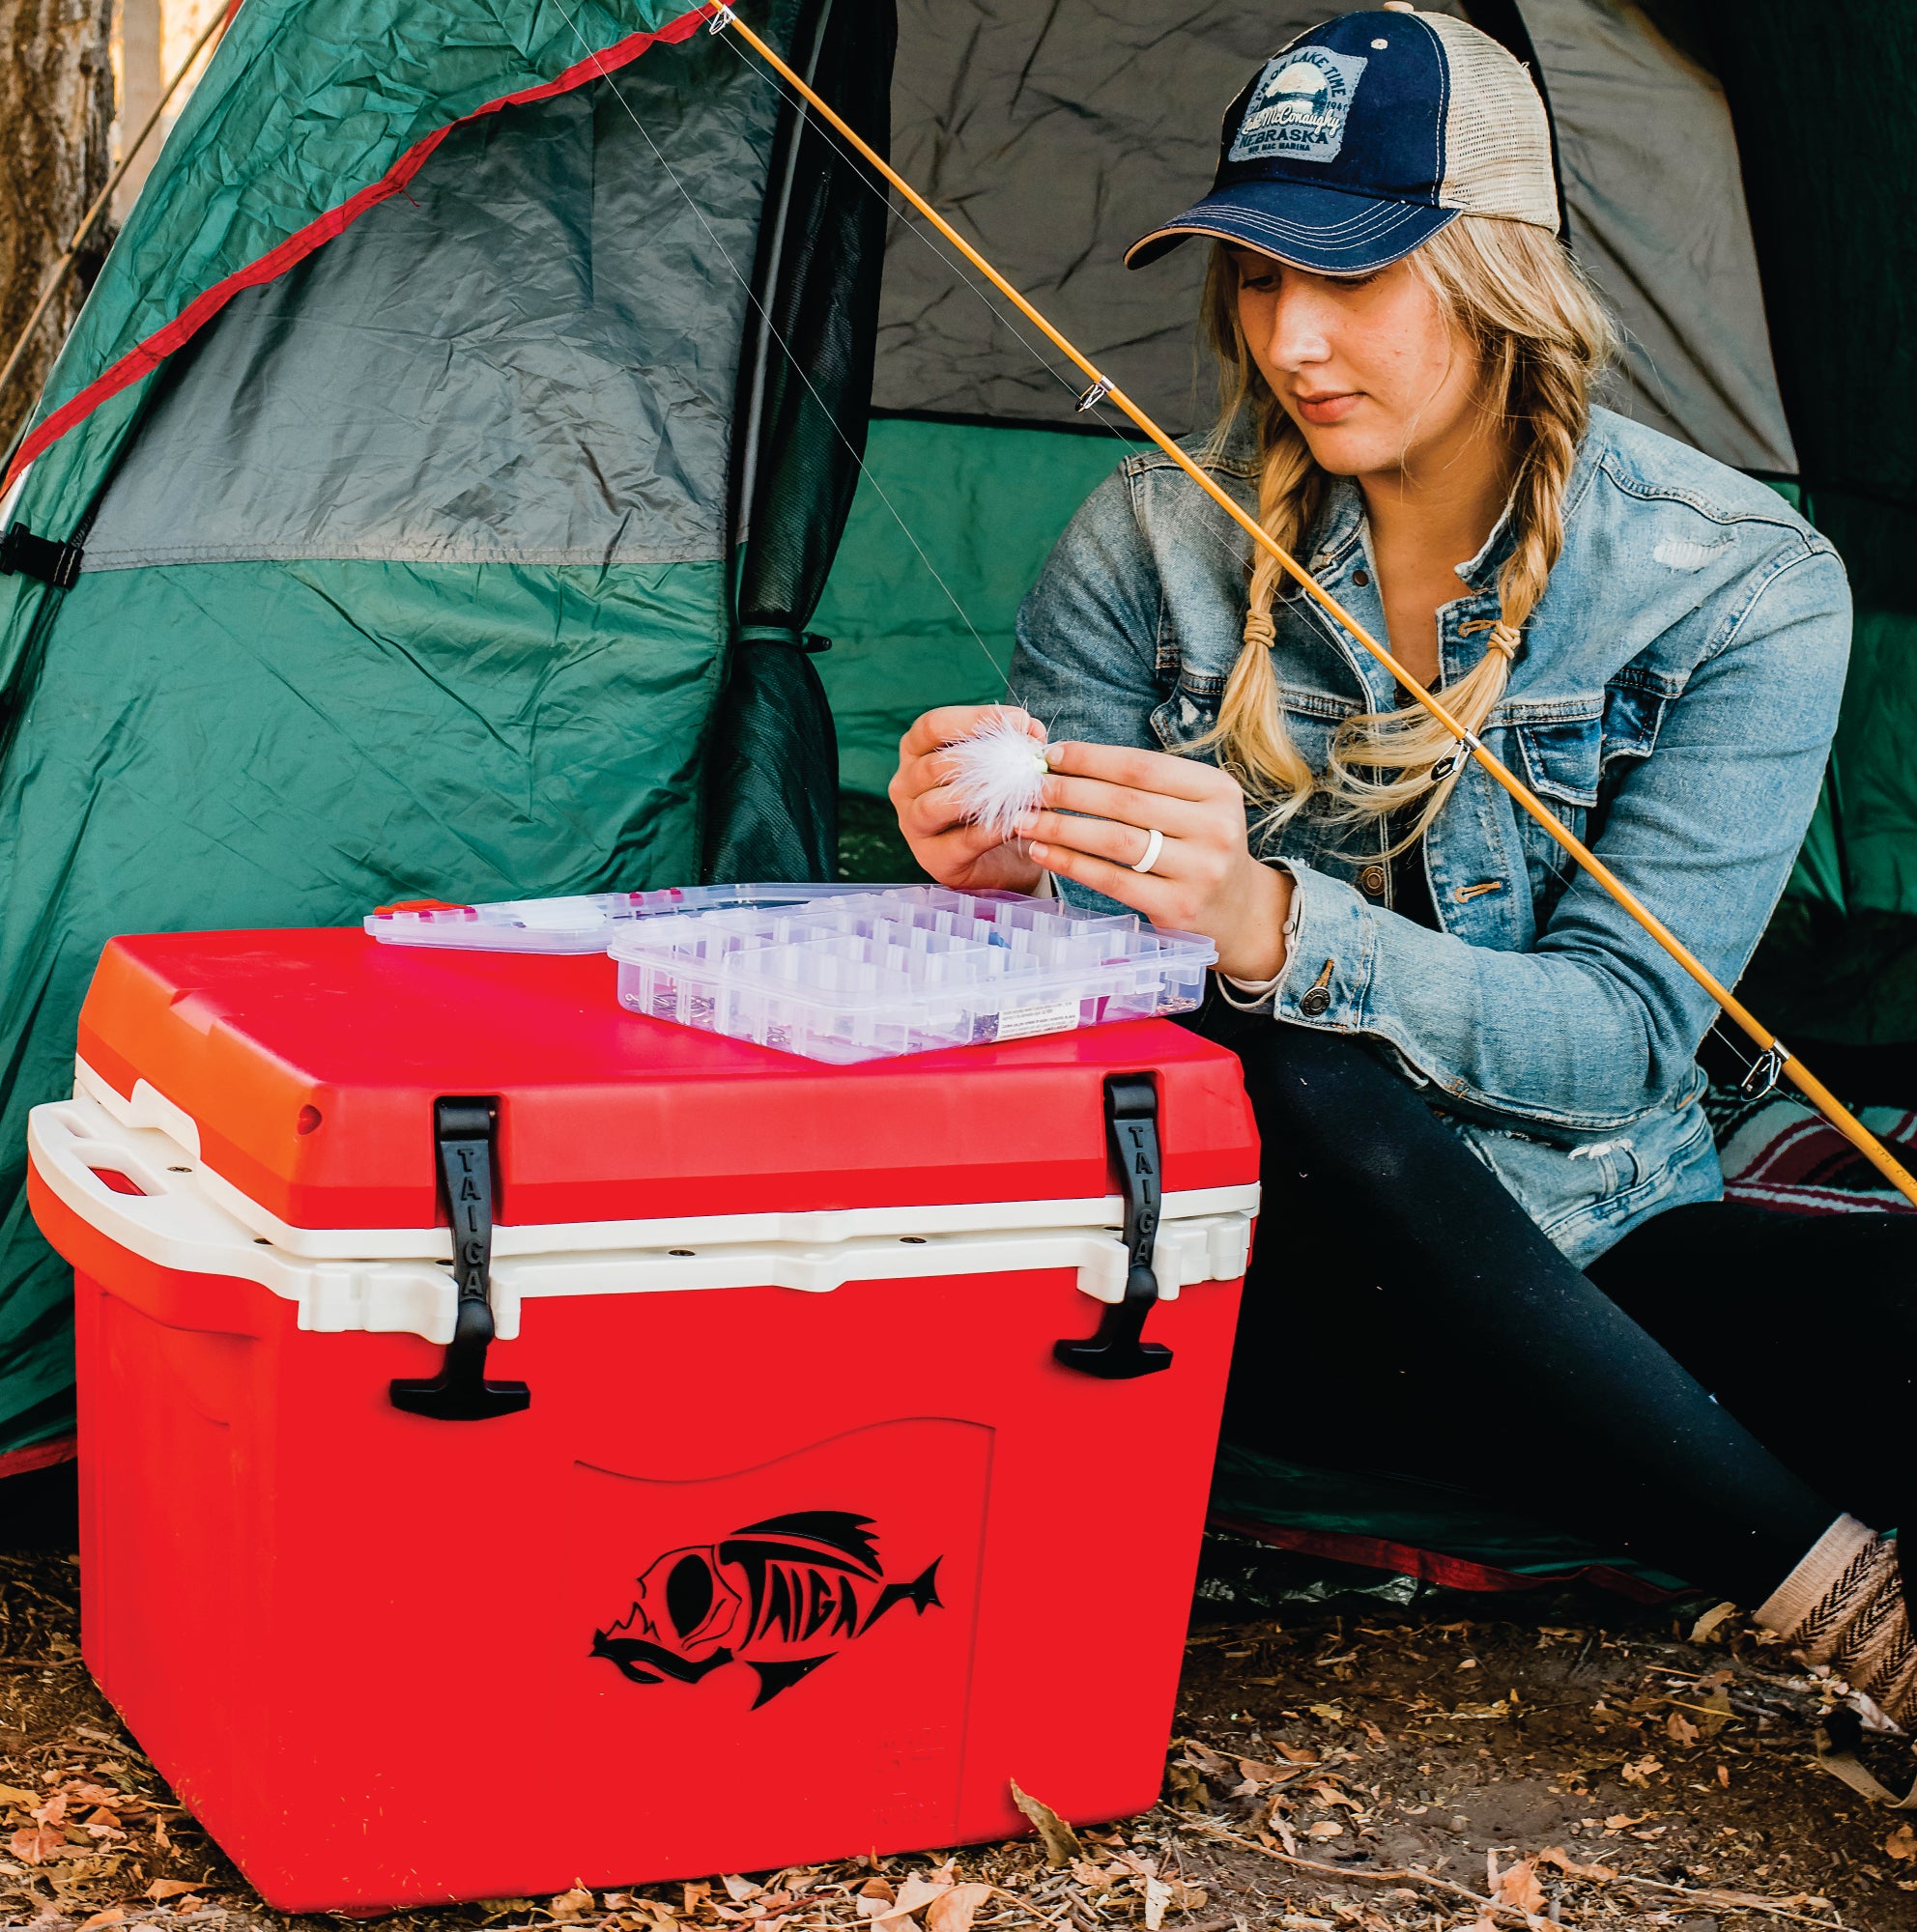 Woman with Taiga Red cooler camping in a tent